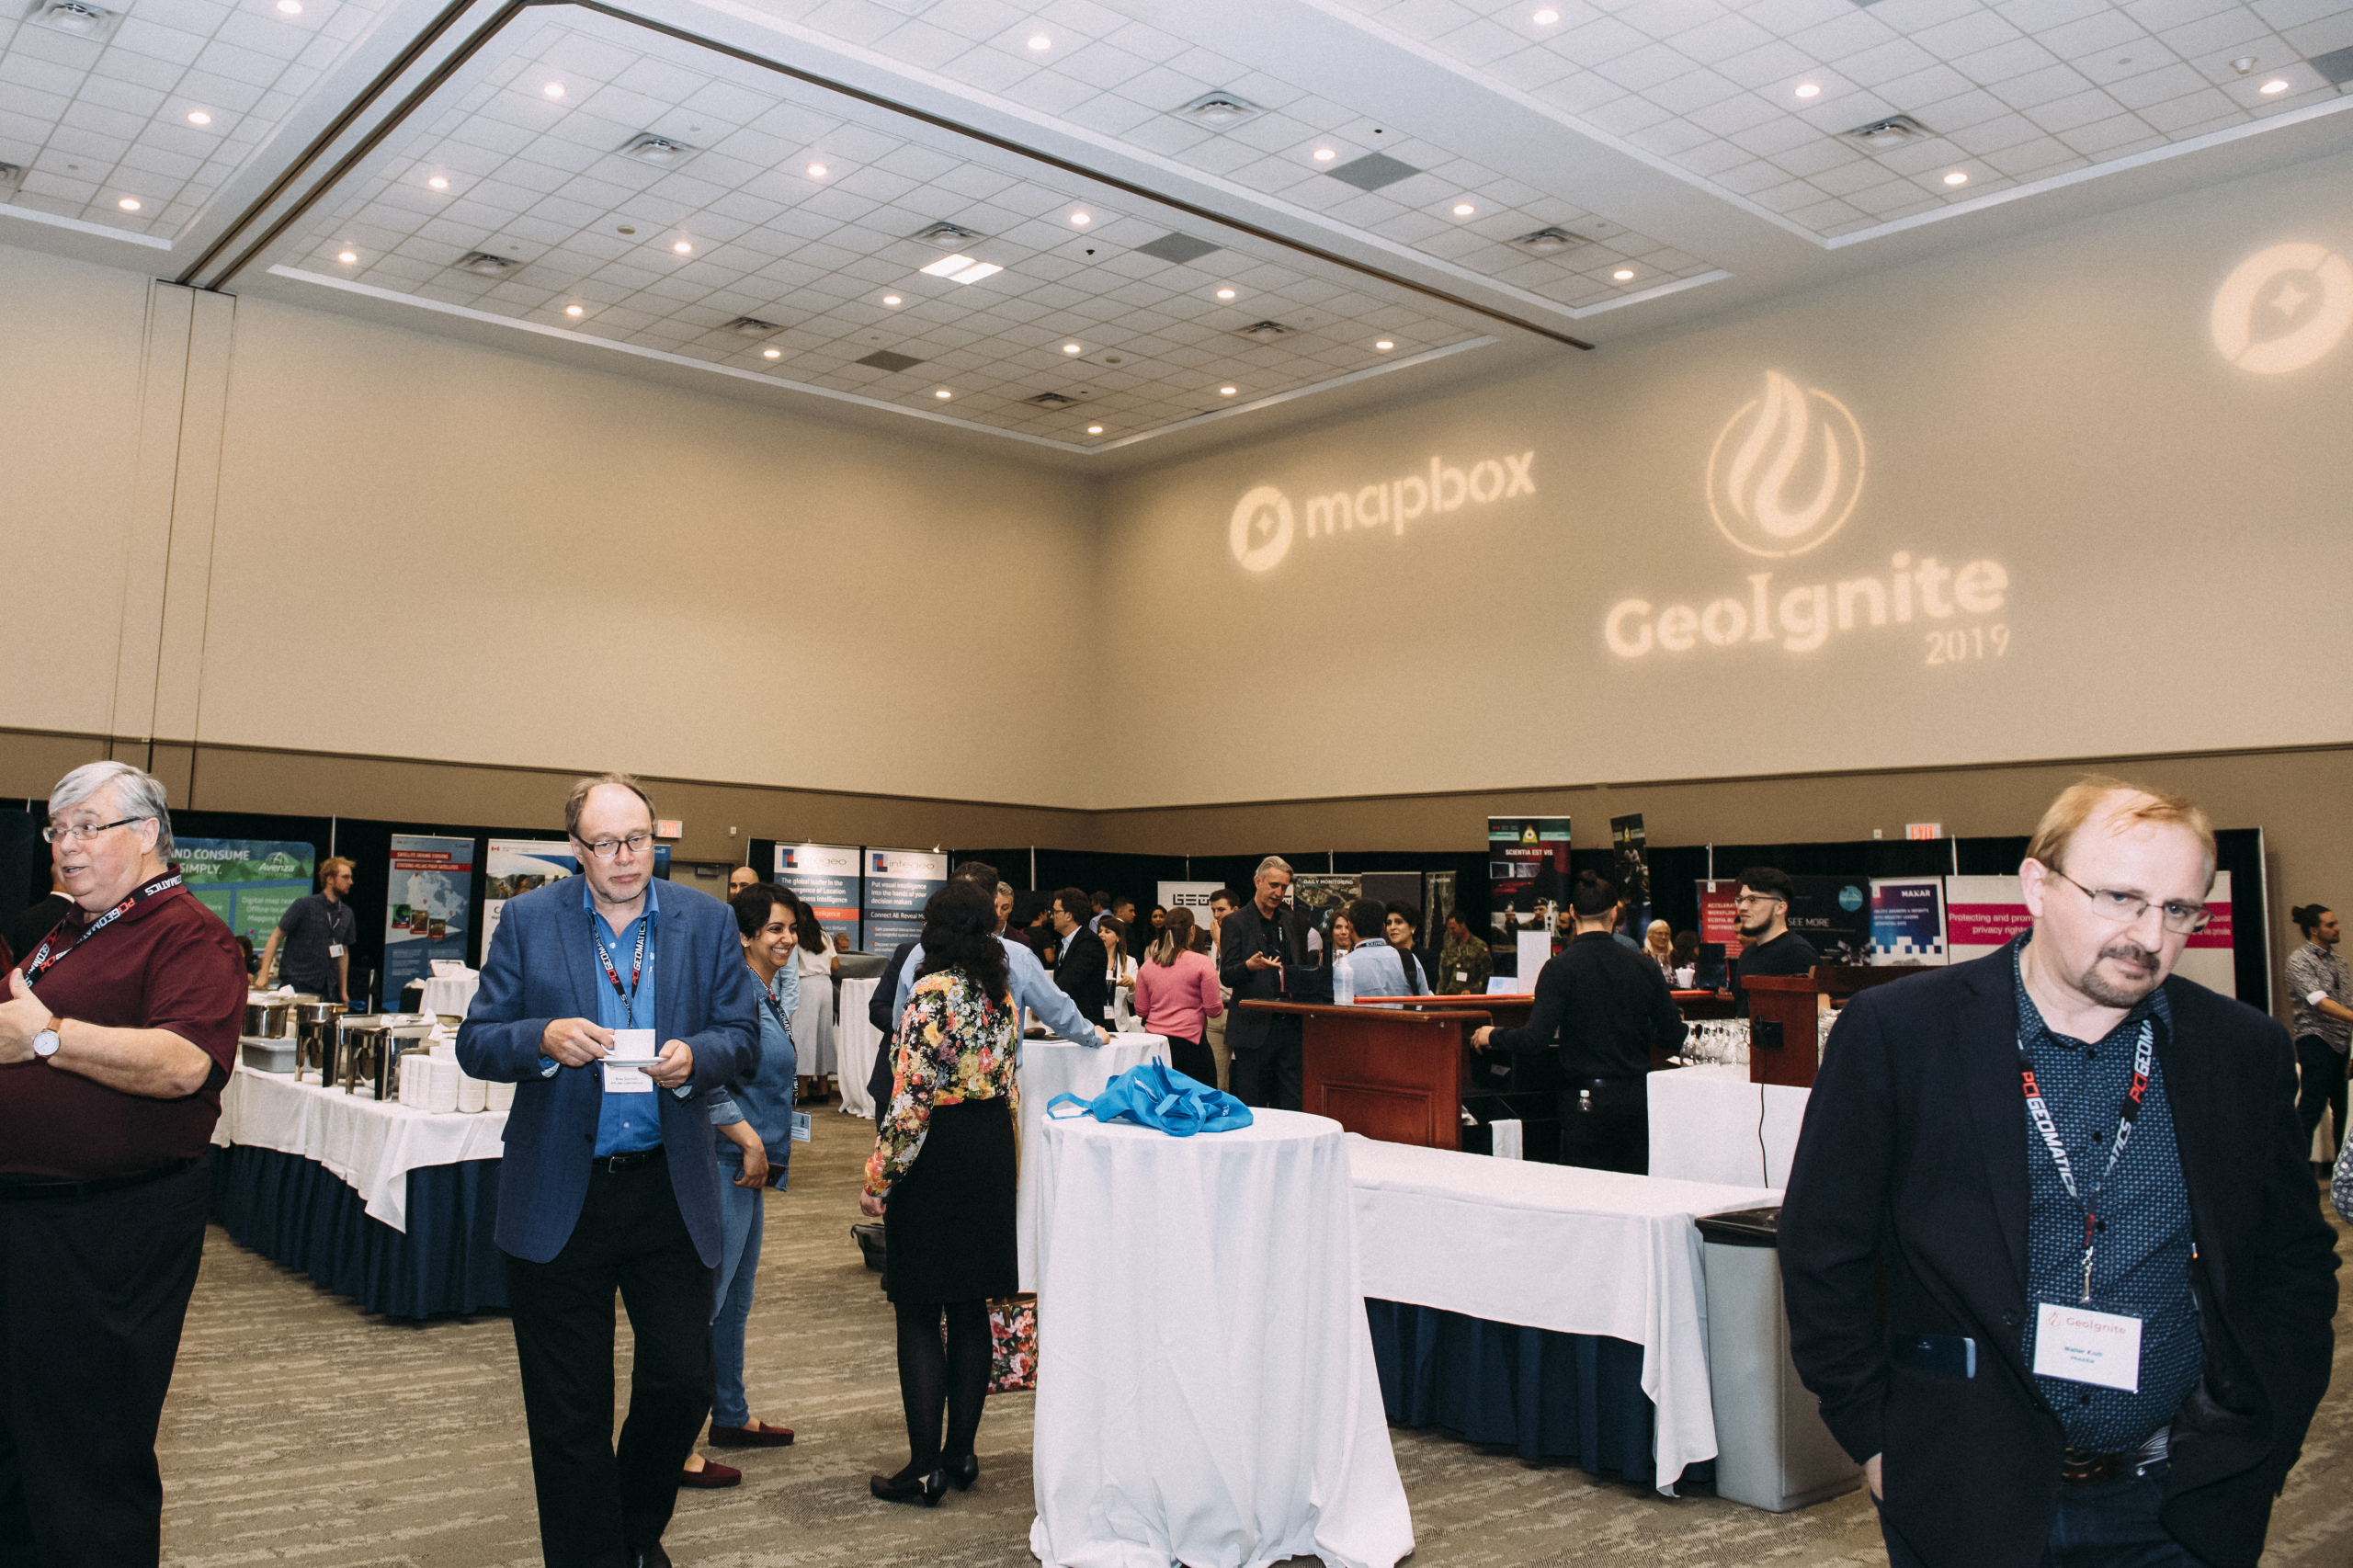 Geoignite 2020 - Canada’s National Geospatial and Location Technology Event